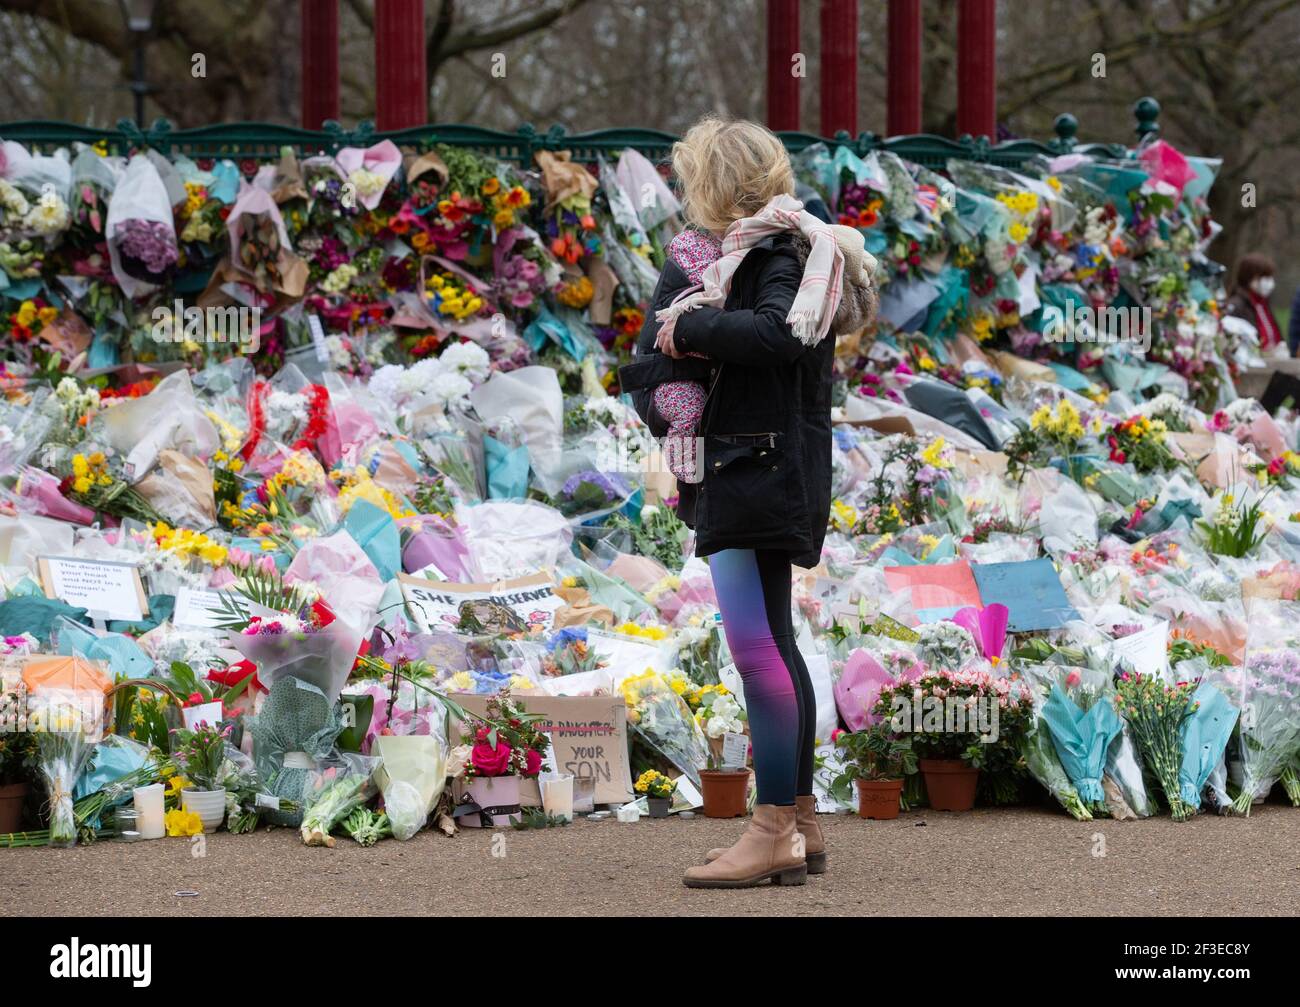 London, UK. 16th Mar, 2021. People continue to leave tributes and flowers for Sarah Everard at the bandstand on Clapham Common which has become a shrine. Sarah was last seen on March 3rd. Her body was found in a builders' bag in Woodland at Ashord. PC Wayne Couzens appeared at the Old Bailey via videolink from Belmarsh prison today. He will go on trial in October. Credit: Mark Thomas/Alamy Live News Stock Photo